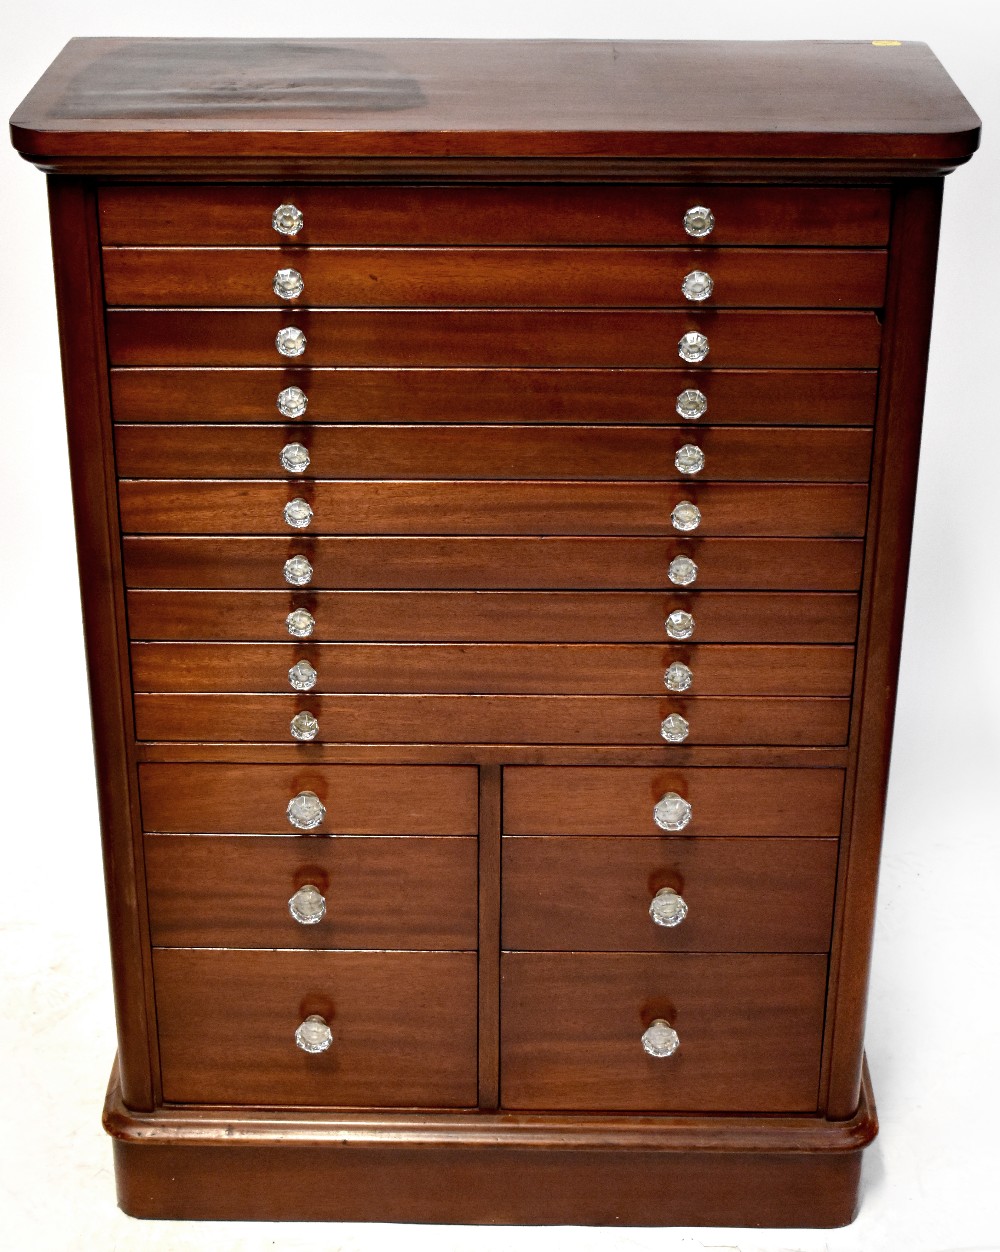 An early 20th century mahogany specimen/collector's chest of ten long drawers over two banks of